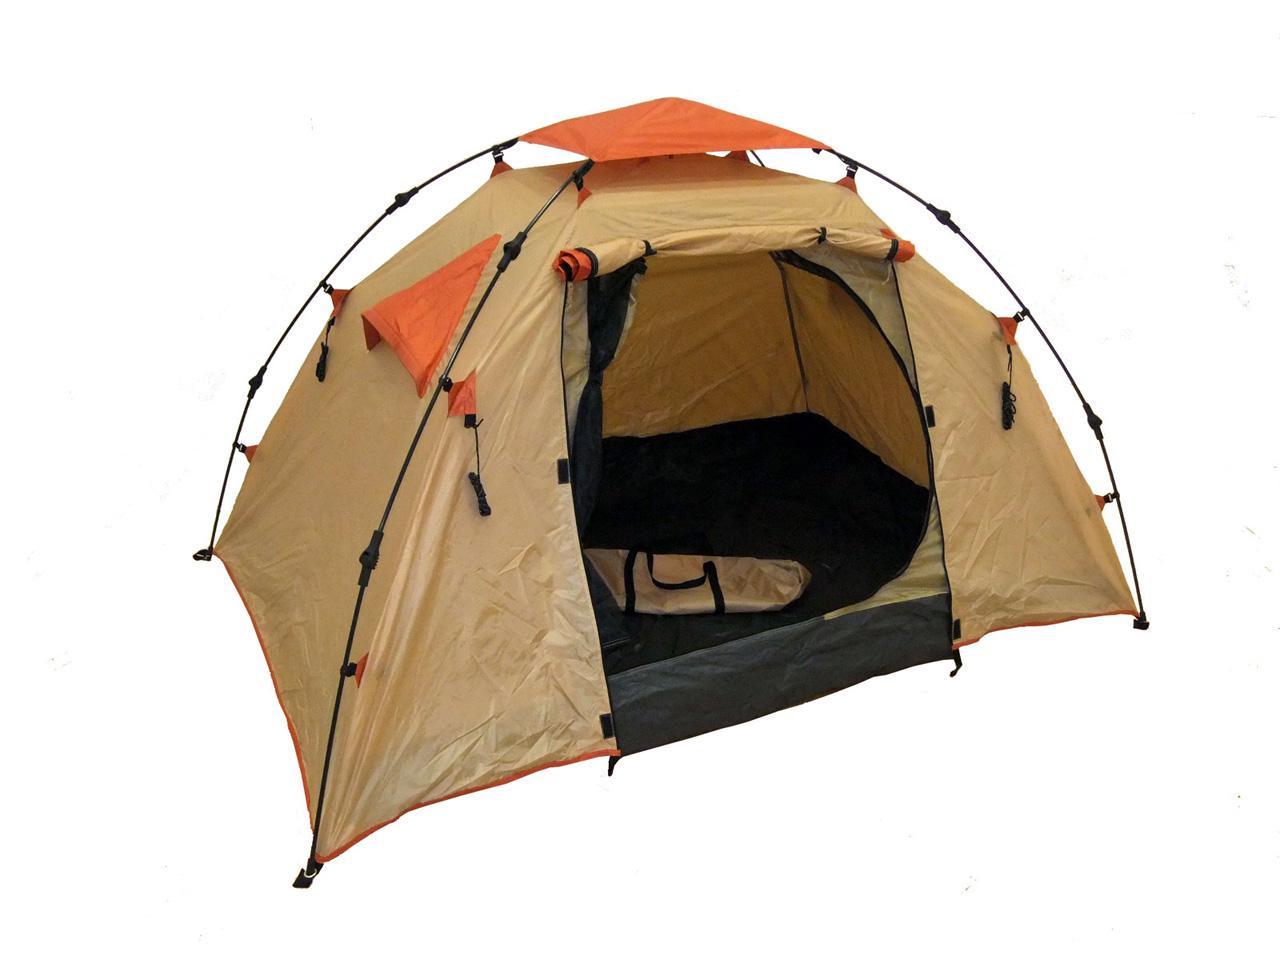 Genji Sports one piece, one step setup family Camping Tent 3P+, fits 2 Tent That Fits King Size Air Mattress